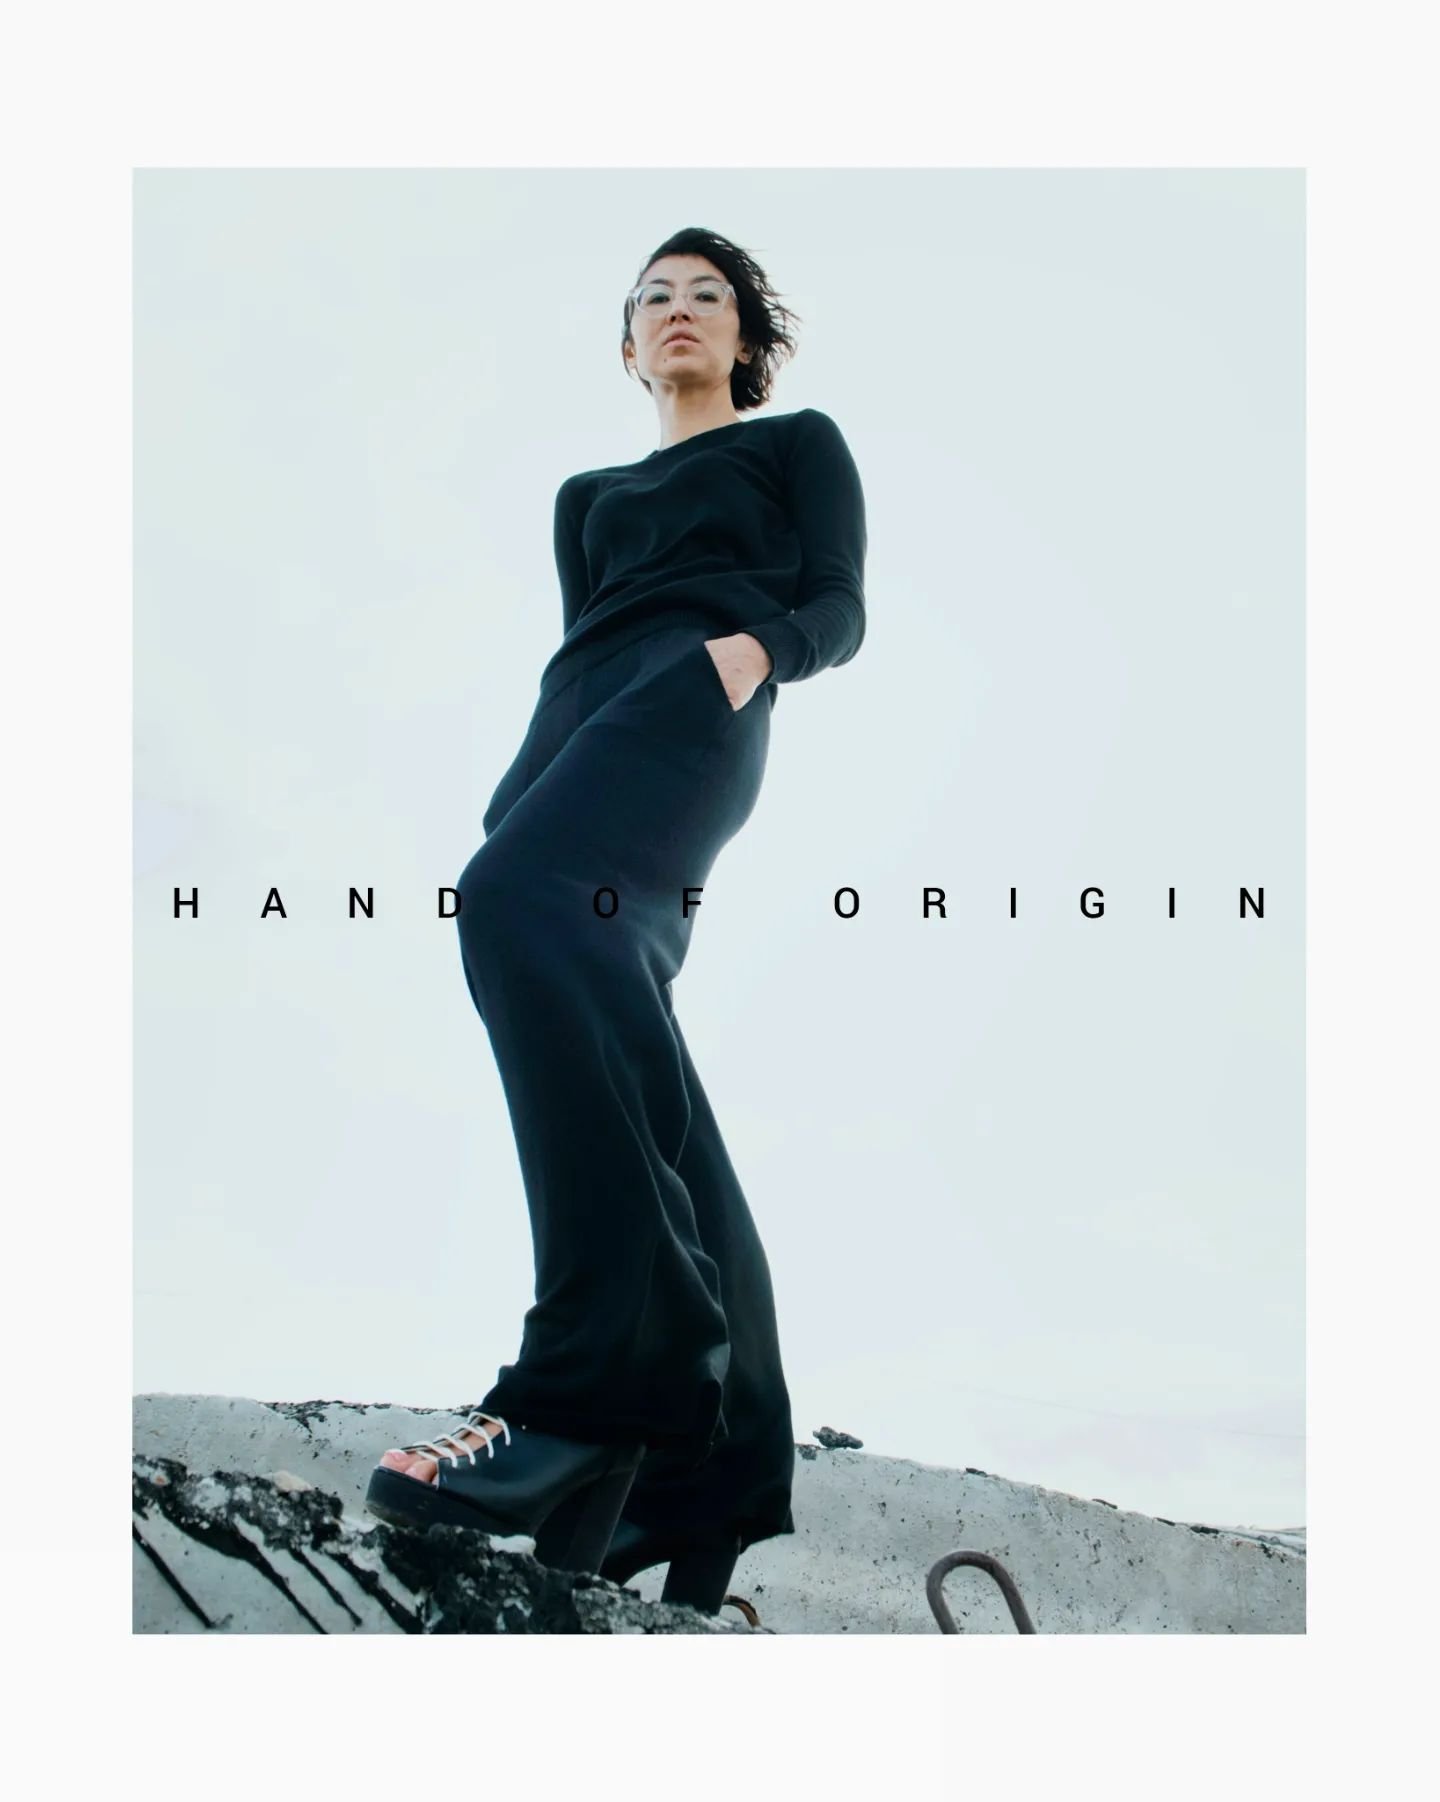 Black Cashmere Fans, rejoice! Our pure cashmere wide leg pants is back and ready to elevate your winter wardrobe! Available in Size Medium.

@hoberlin_

www.handoforigin.com/shop

#berlinbrand
#purecashmere #berlin #madeinmongolia #black
#CashmereLov